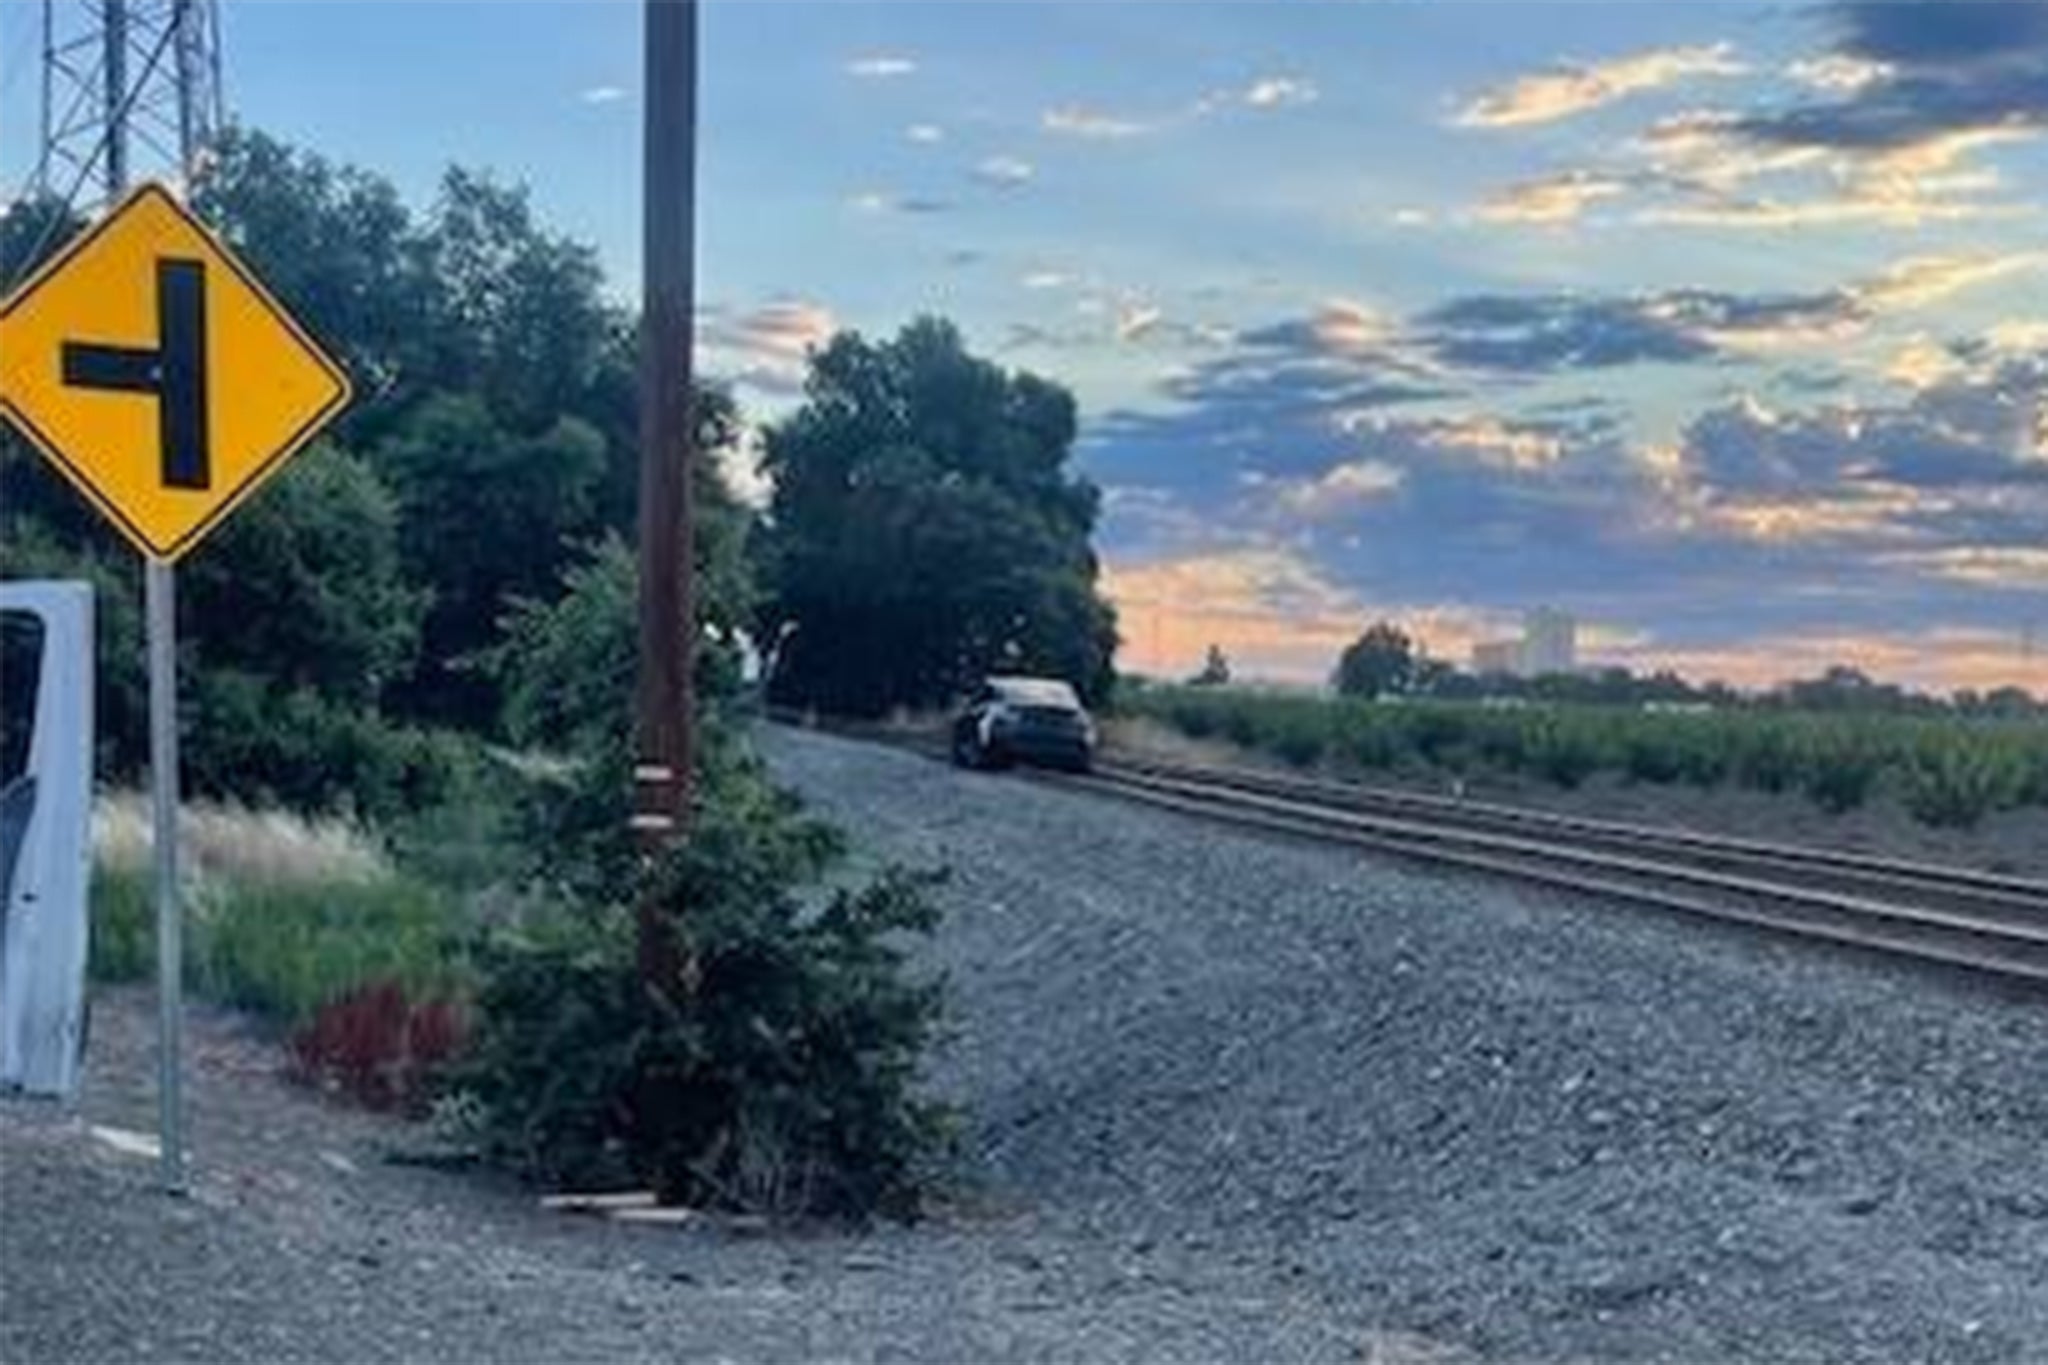 Woodland Police Department shared the image of the Tesla on the train tracks on Wednesday